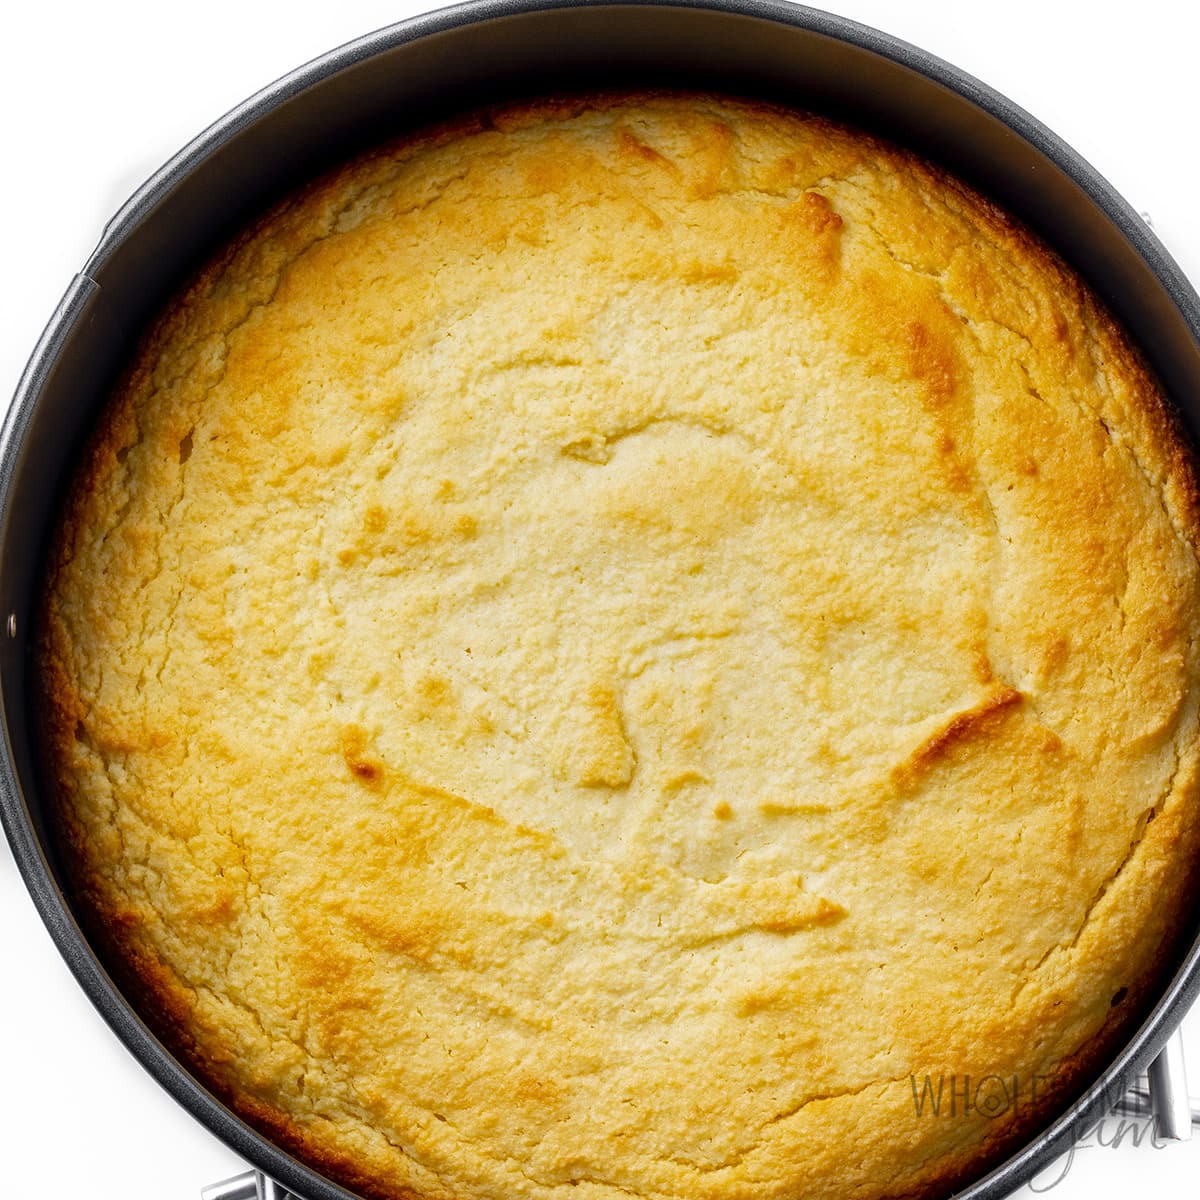 Baked almond cake in a springform pan.